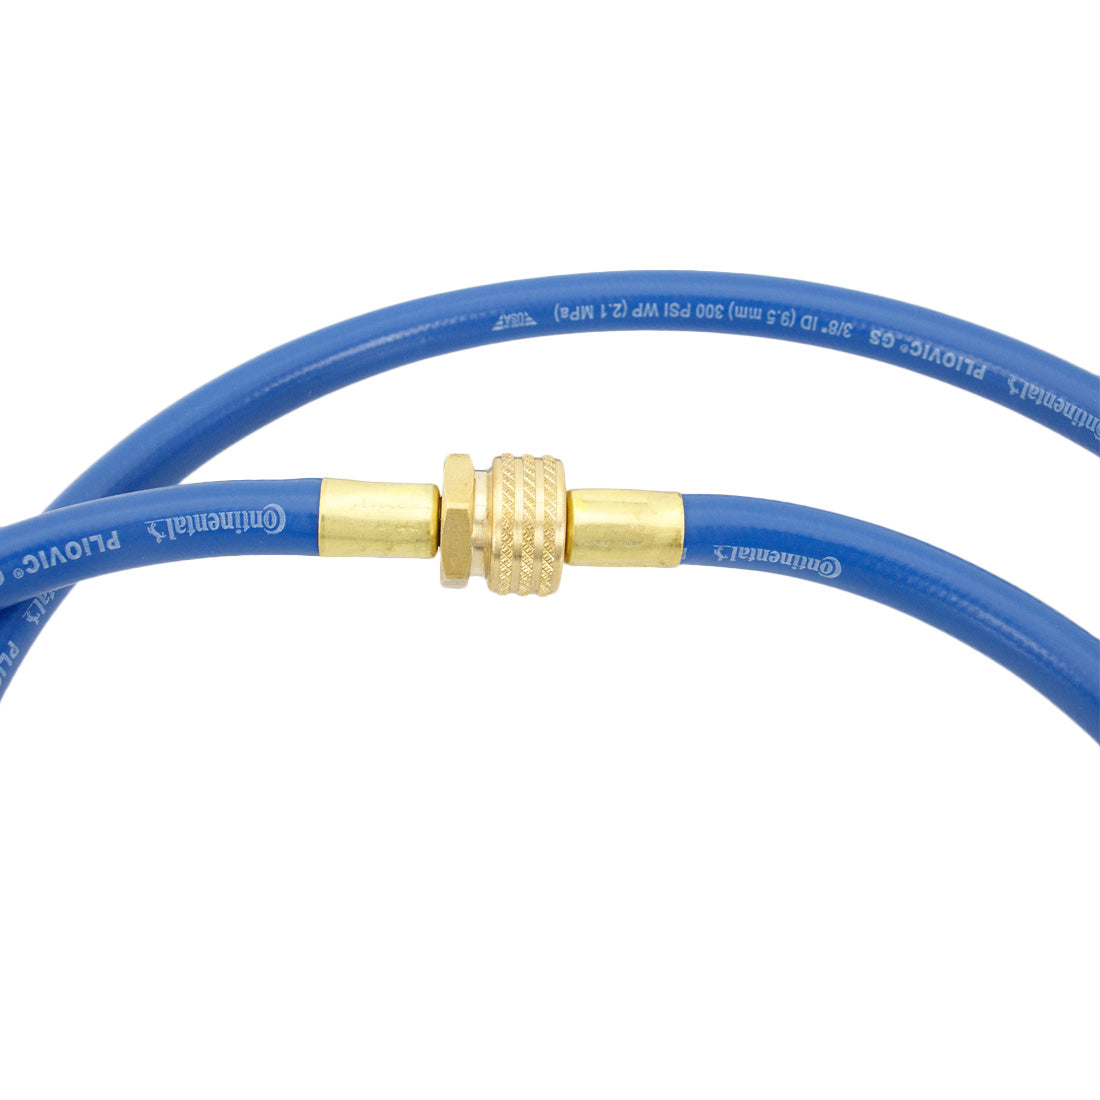 XERO Whip Line / Upgraded Waste Line - 6 Foot Blue Hose Brass Fittings Close-Up View